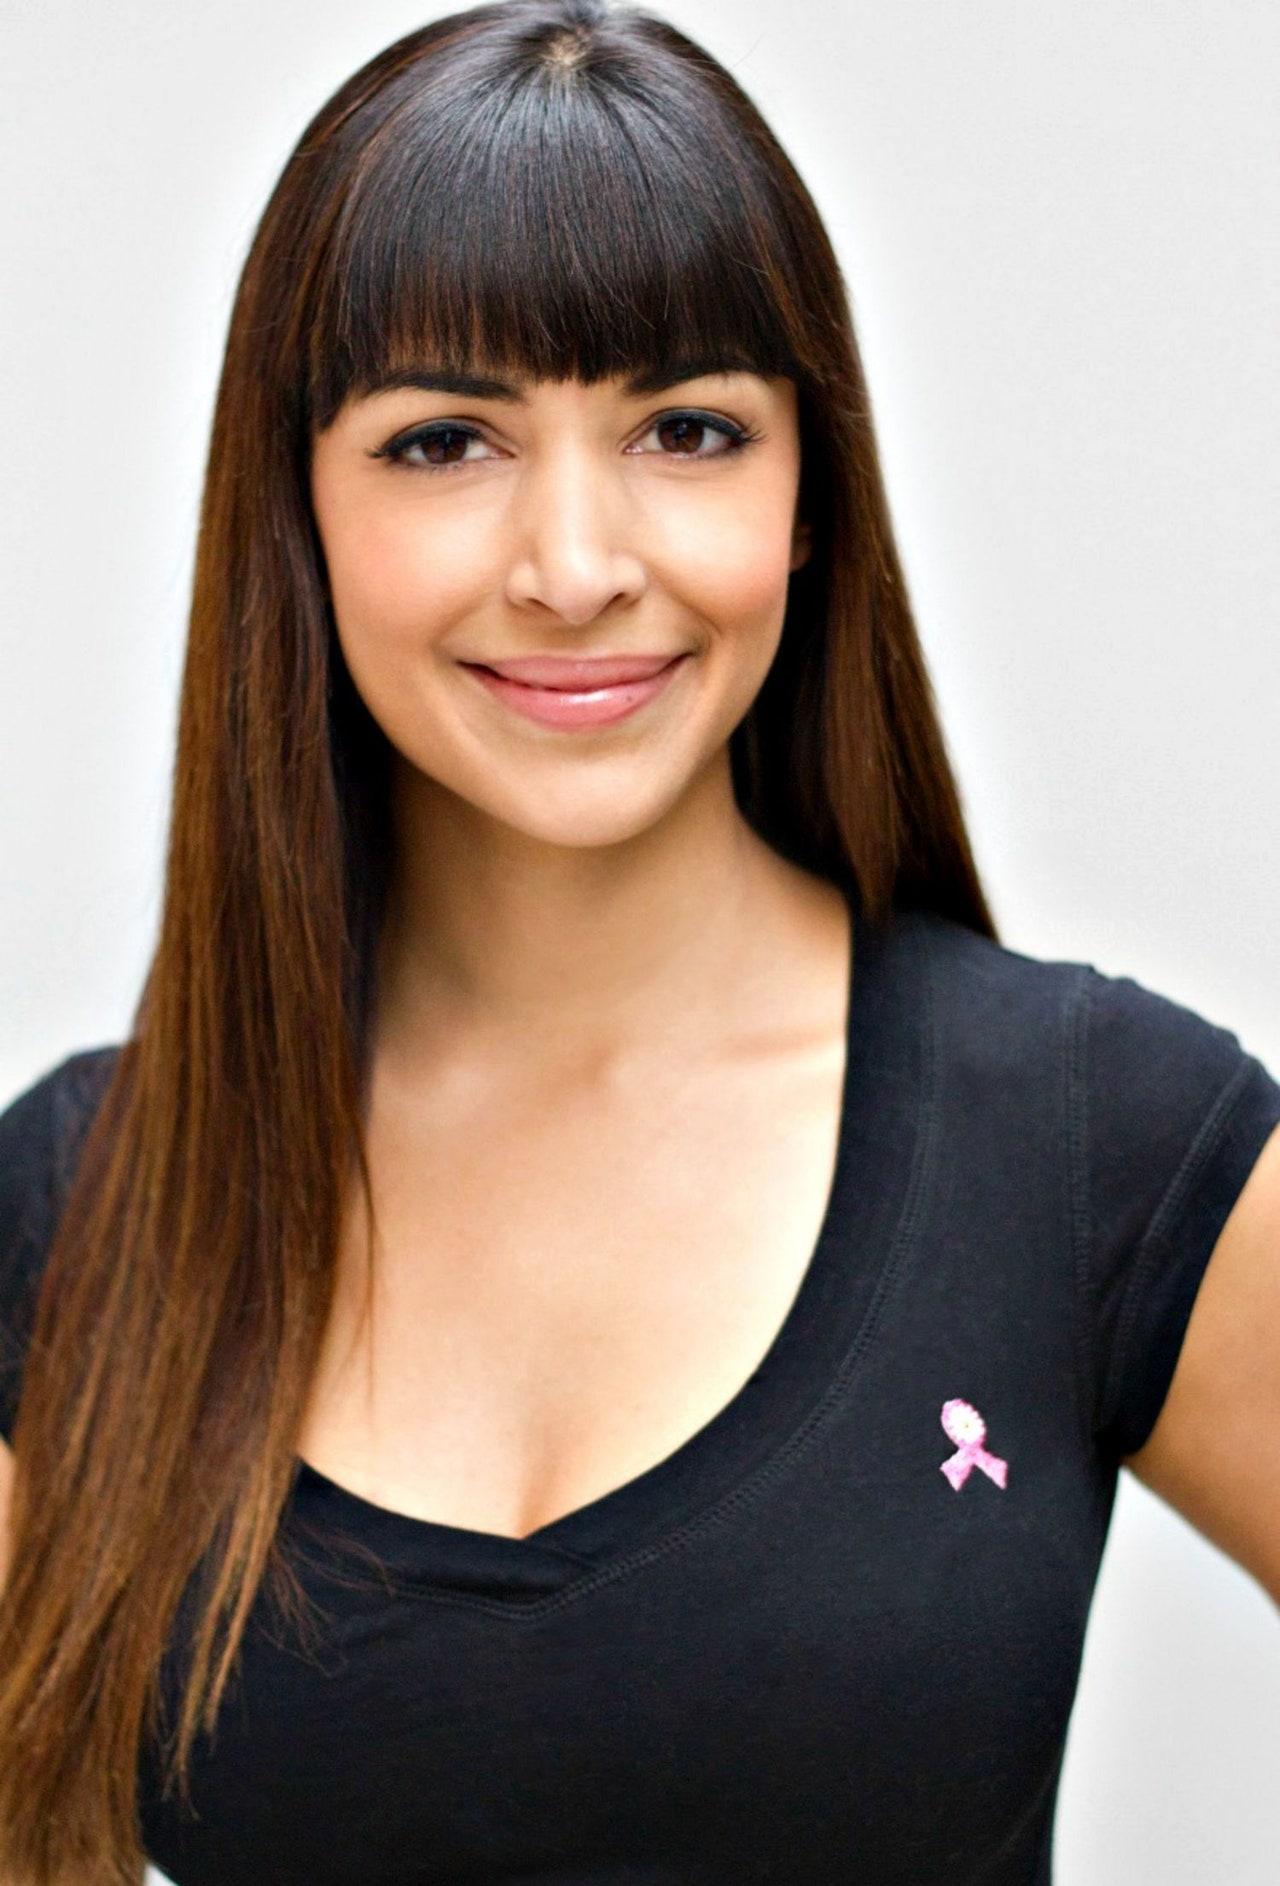 70+ Hot Pictures Of Hannah Simone Are Sexy As Hell 33